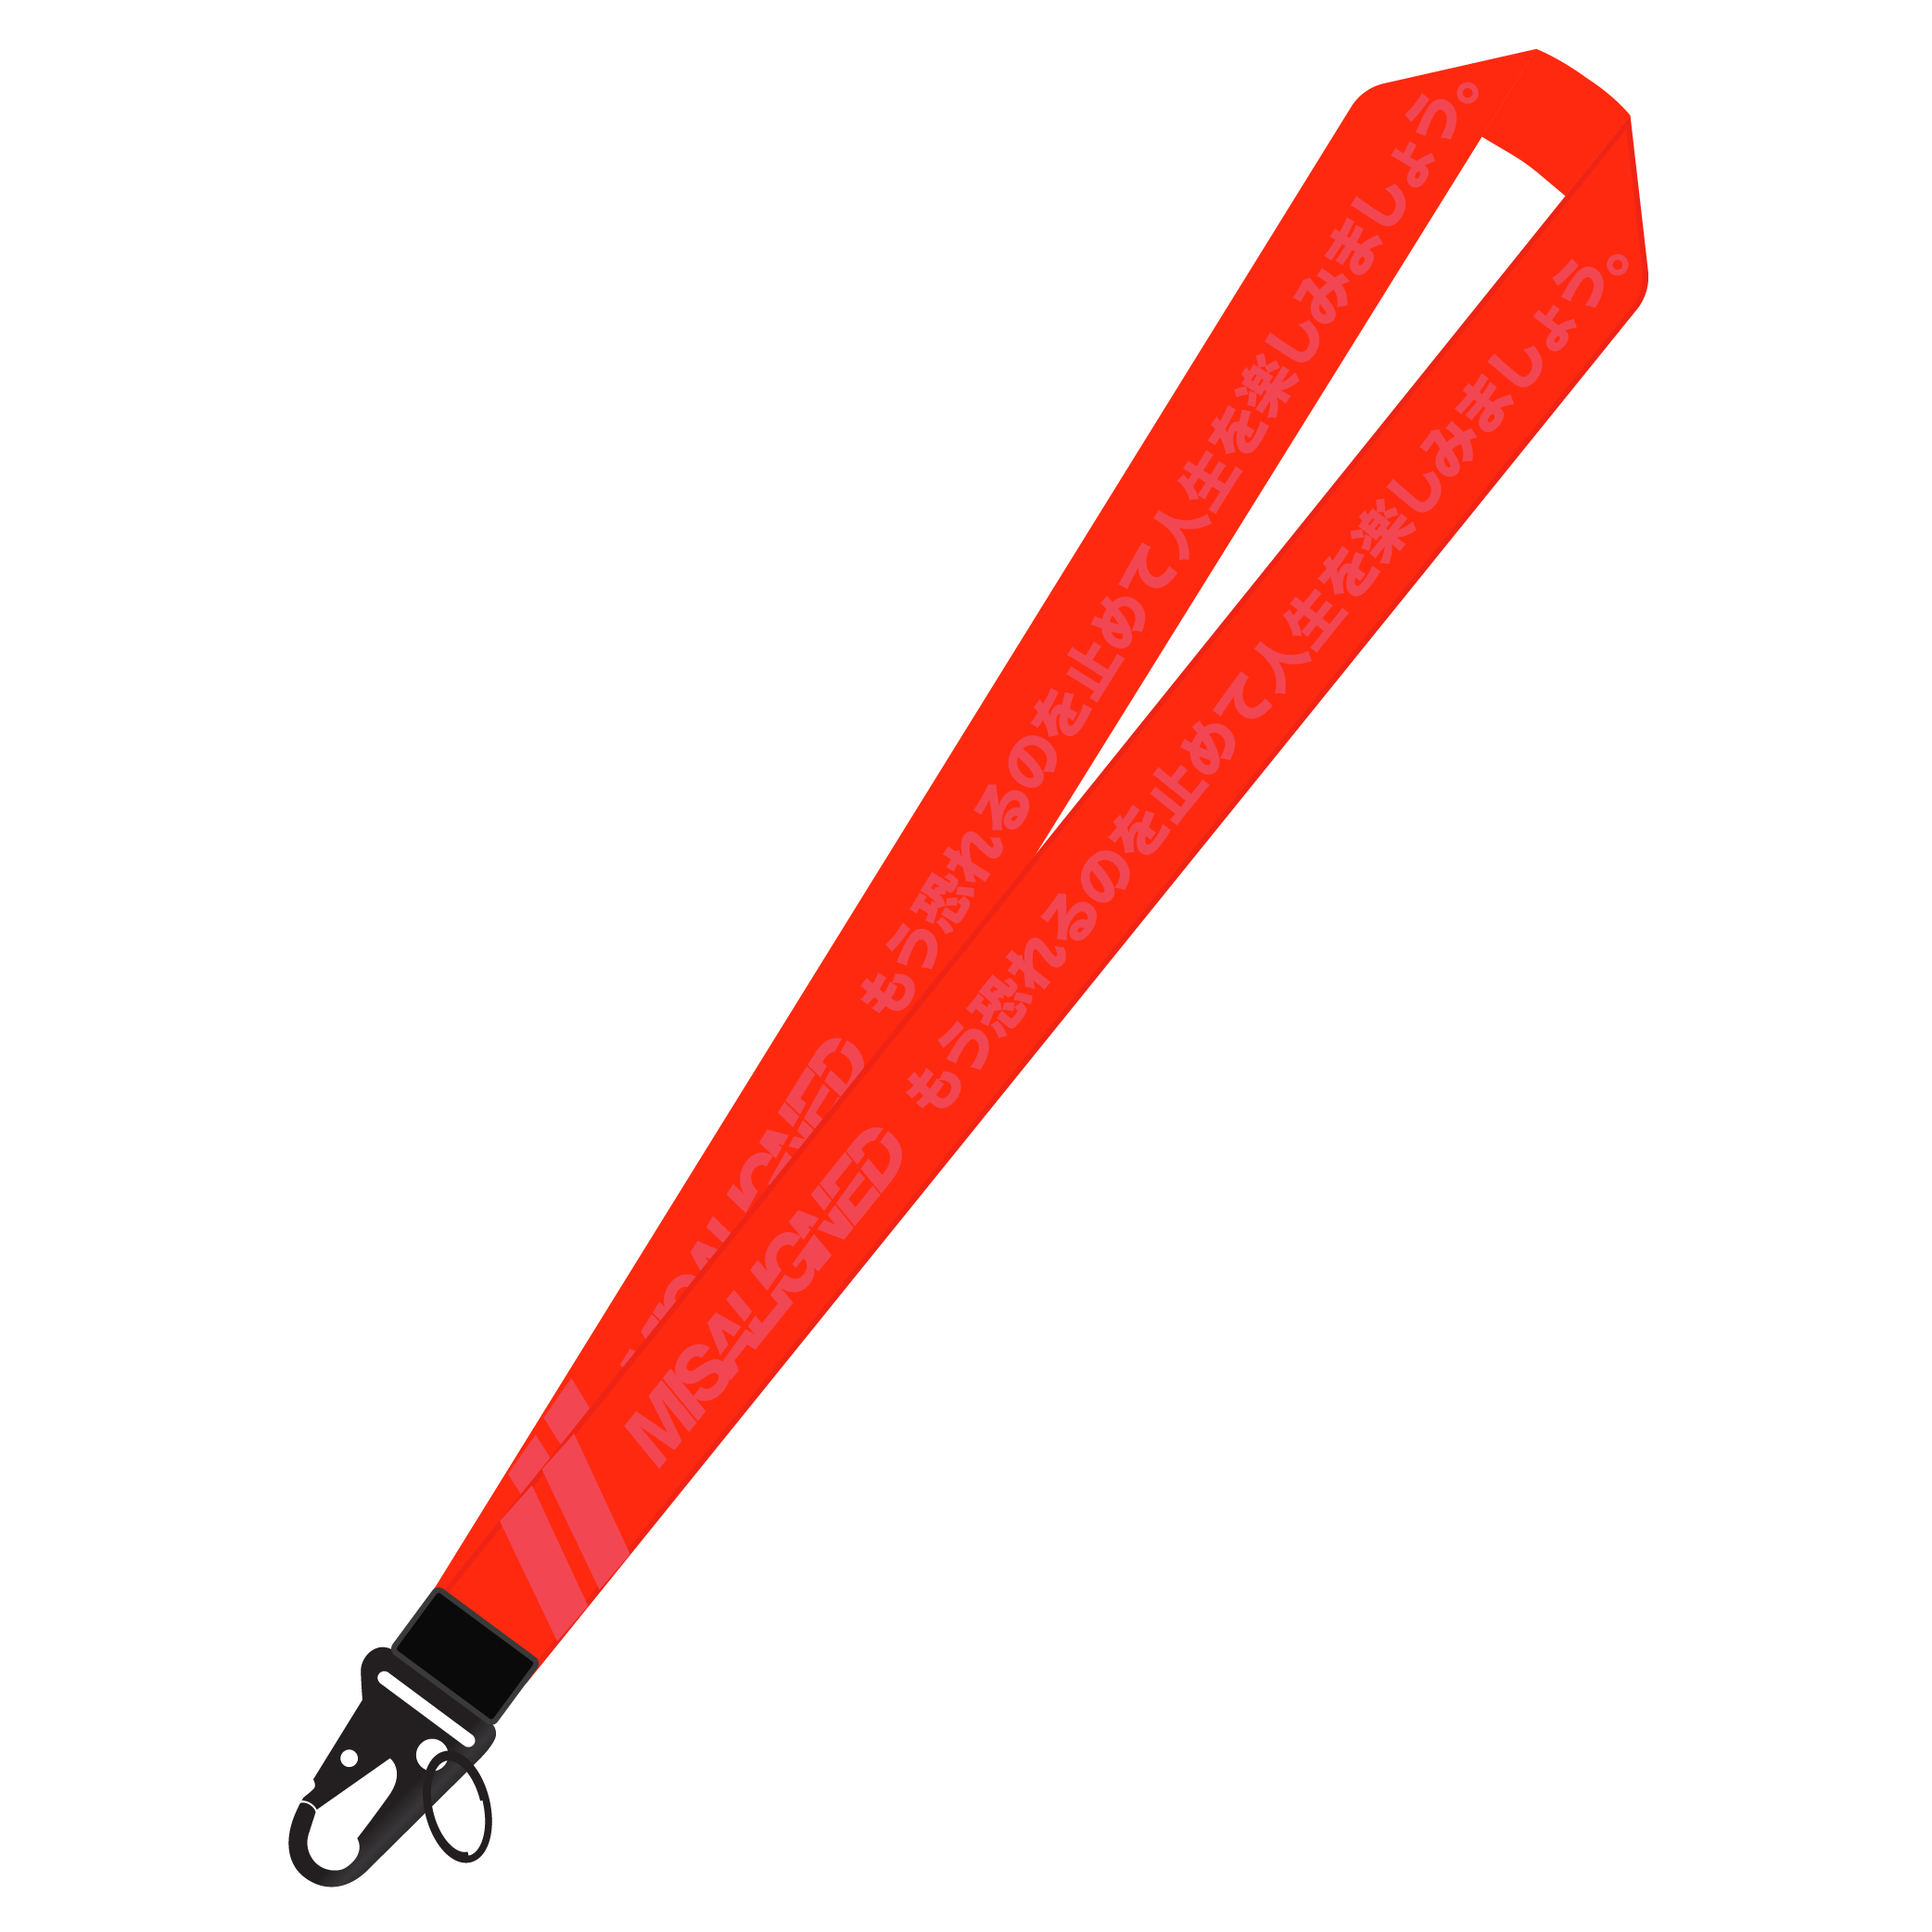 STOP WORRYING - CW 'STEALTH RED' LANYARD